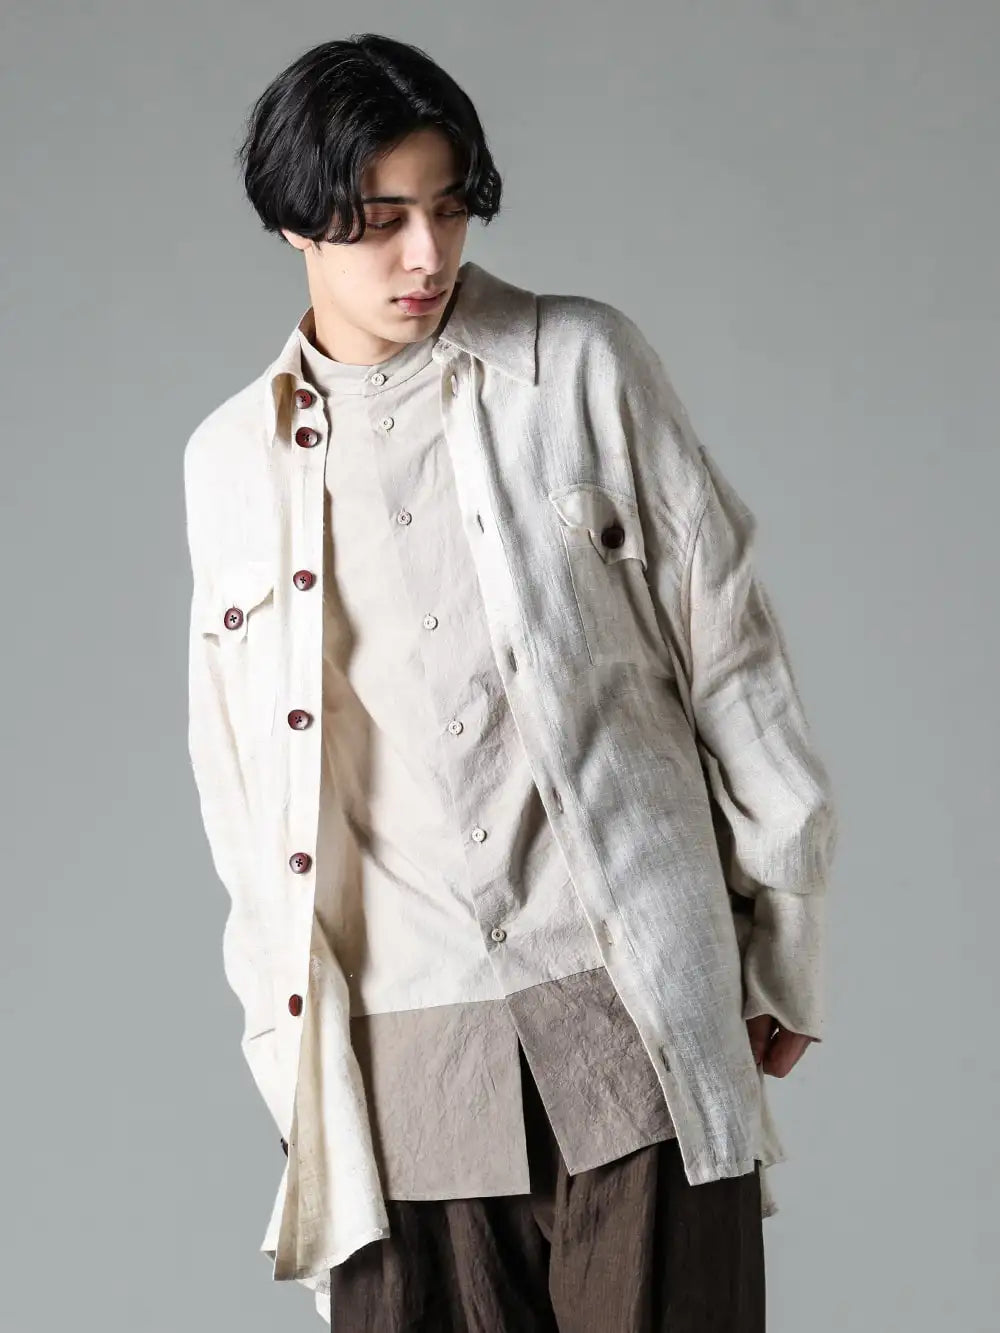 Peng Tai DEVOA 24SS  - Oversized shirts tailored with a neutral atmosphere - PTS24M06-2 Hand Dye Double Pocket Oversized Shirt SHE-CTKM Shirt Cotton 2-001